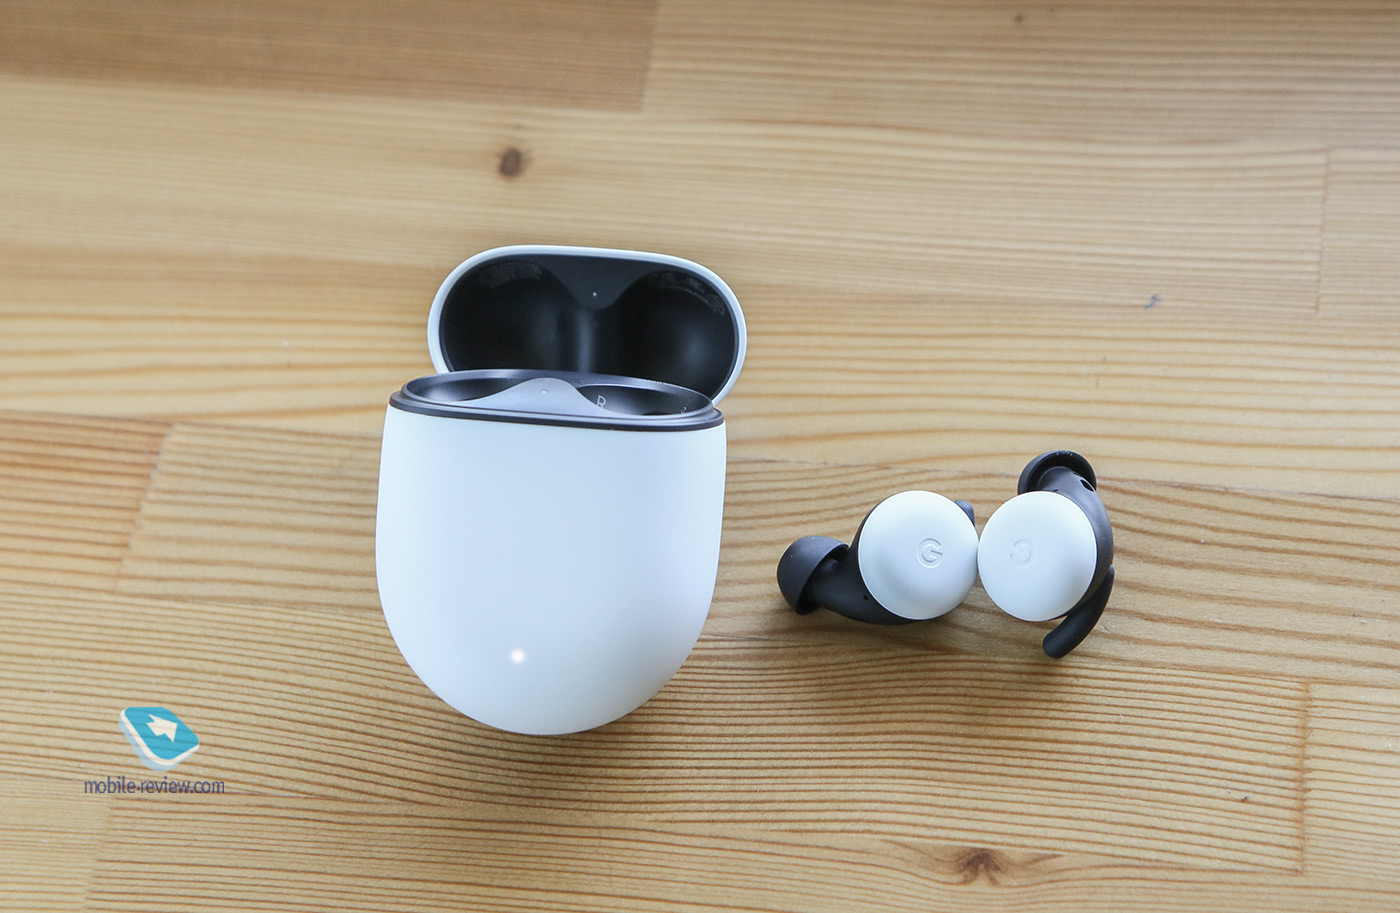 Google Pixel Buds (2020 or Buds 2) wireless earbuds review